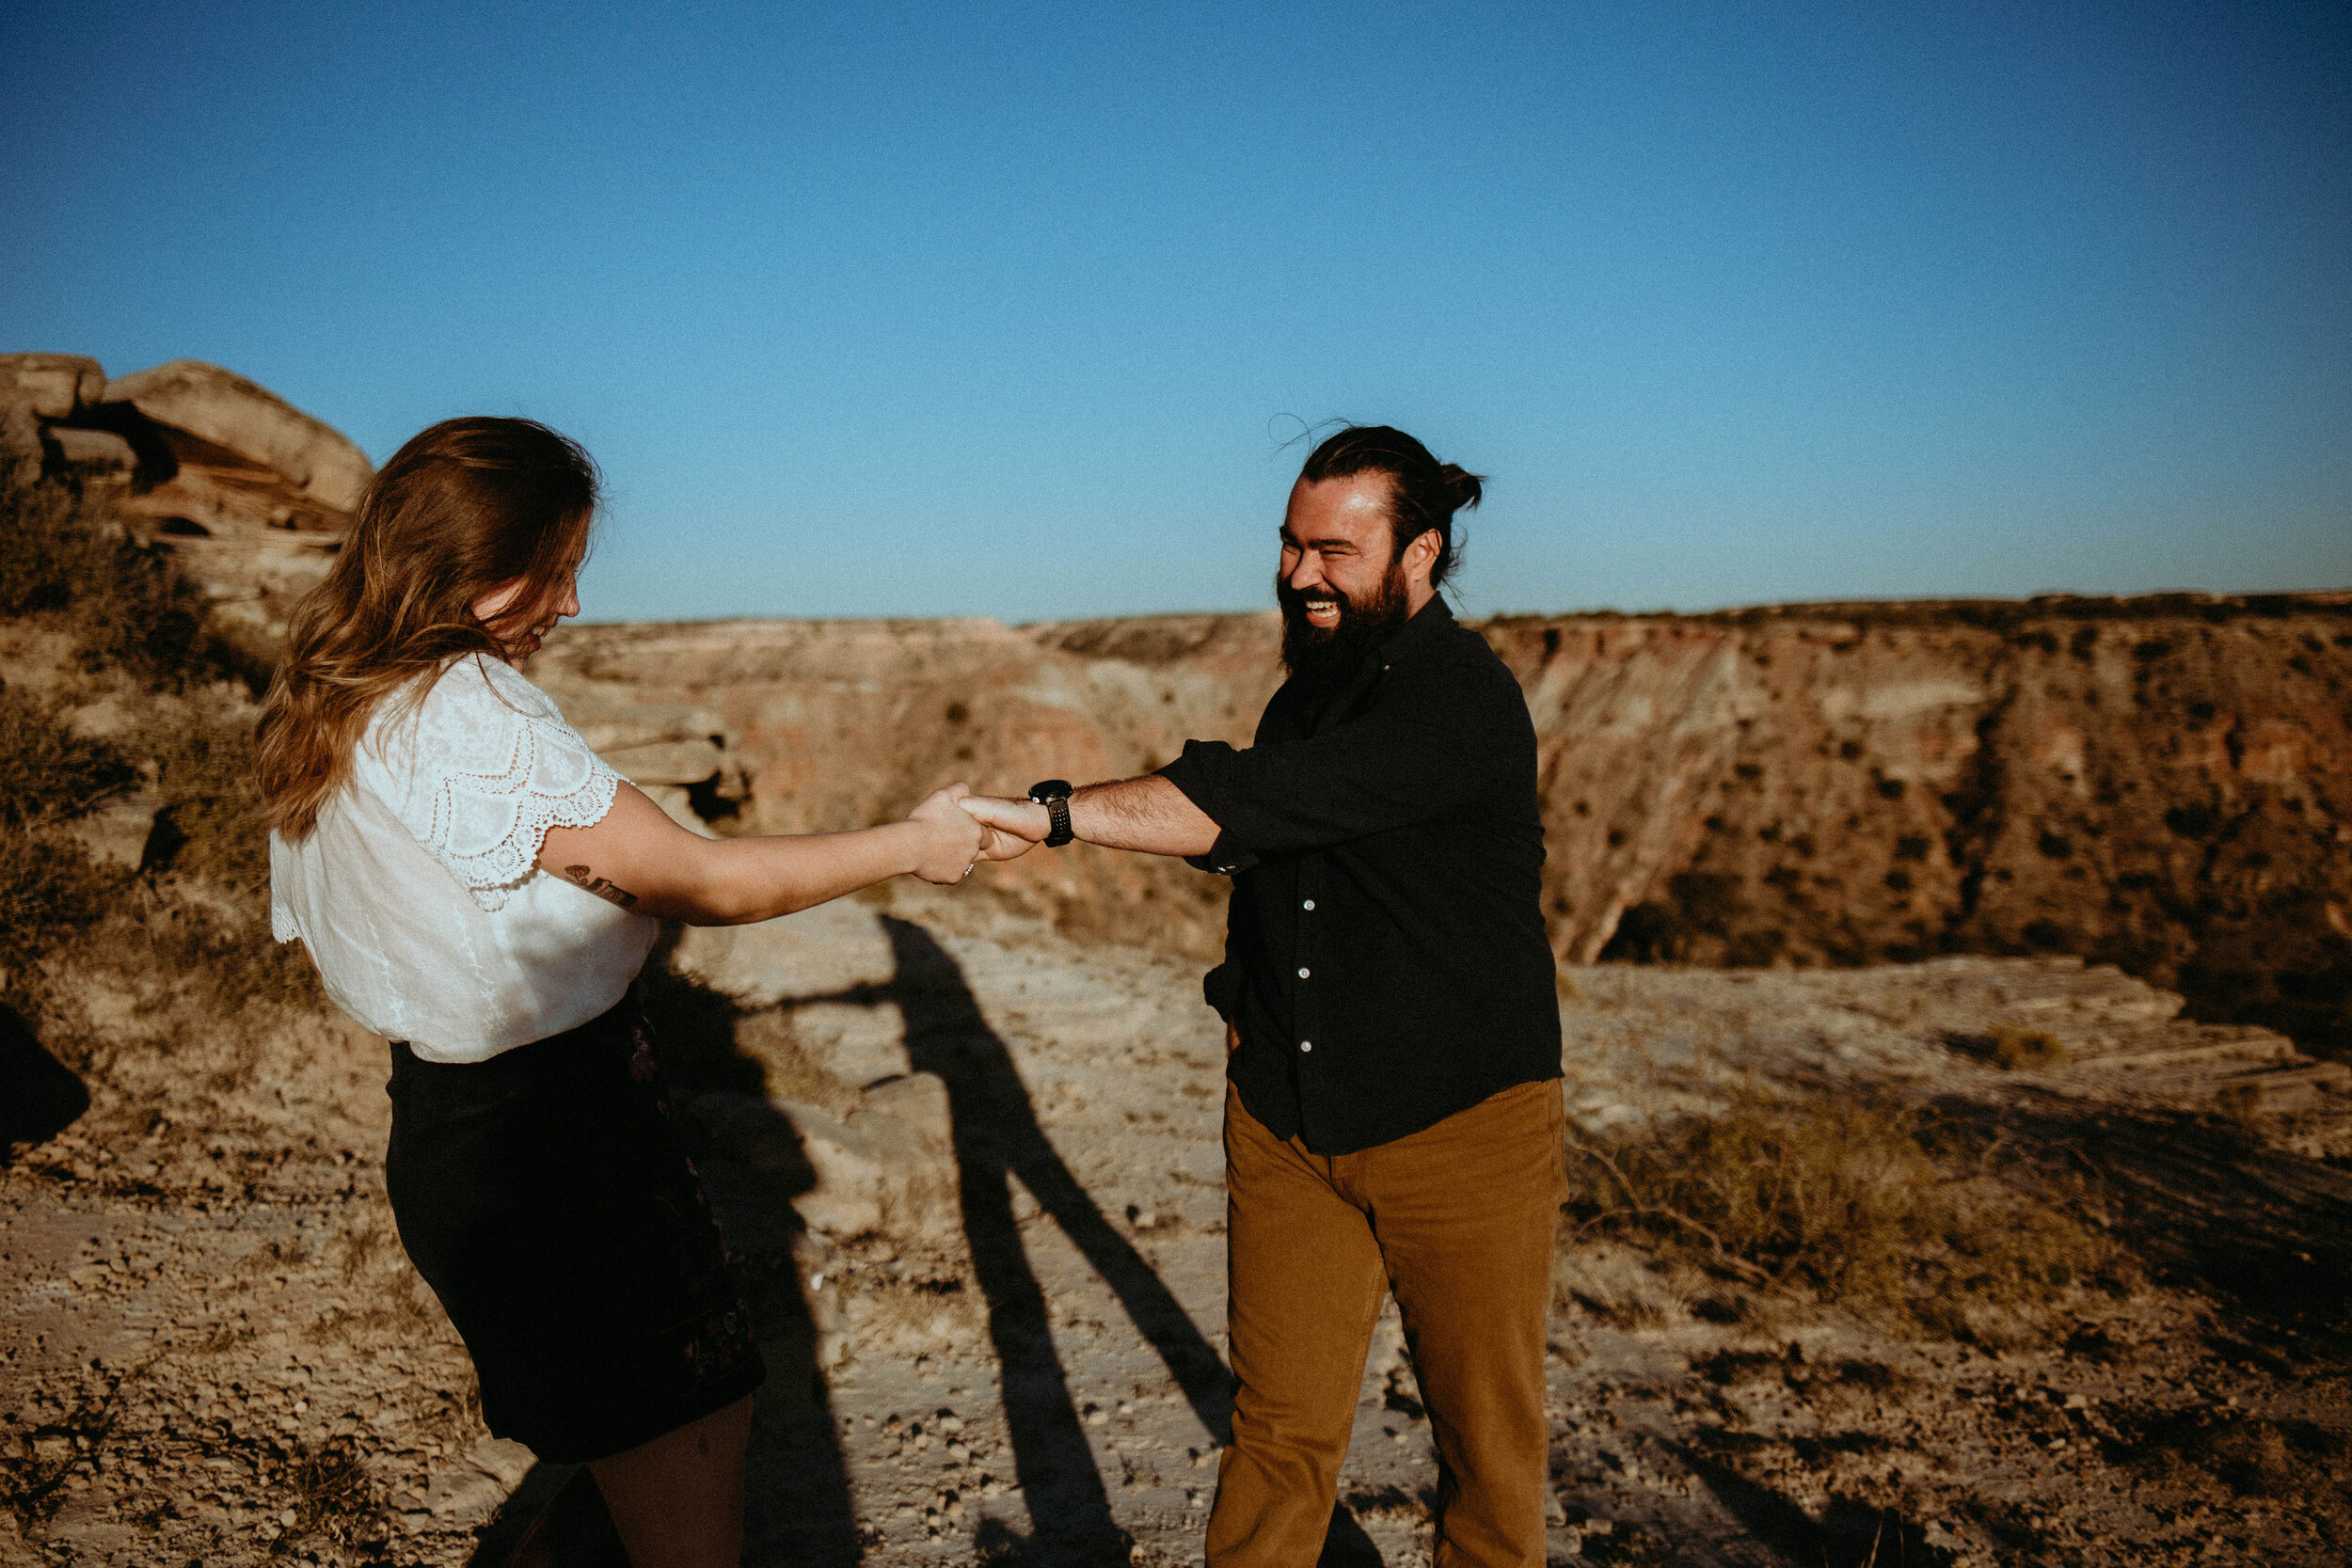 Lubbock Photographers, Kailee Ann Photography, Lubbock Texas Engagement &amp; Wedding Photographer, Photoshoot in Palo Duro Canyon